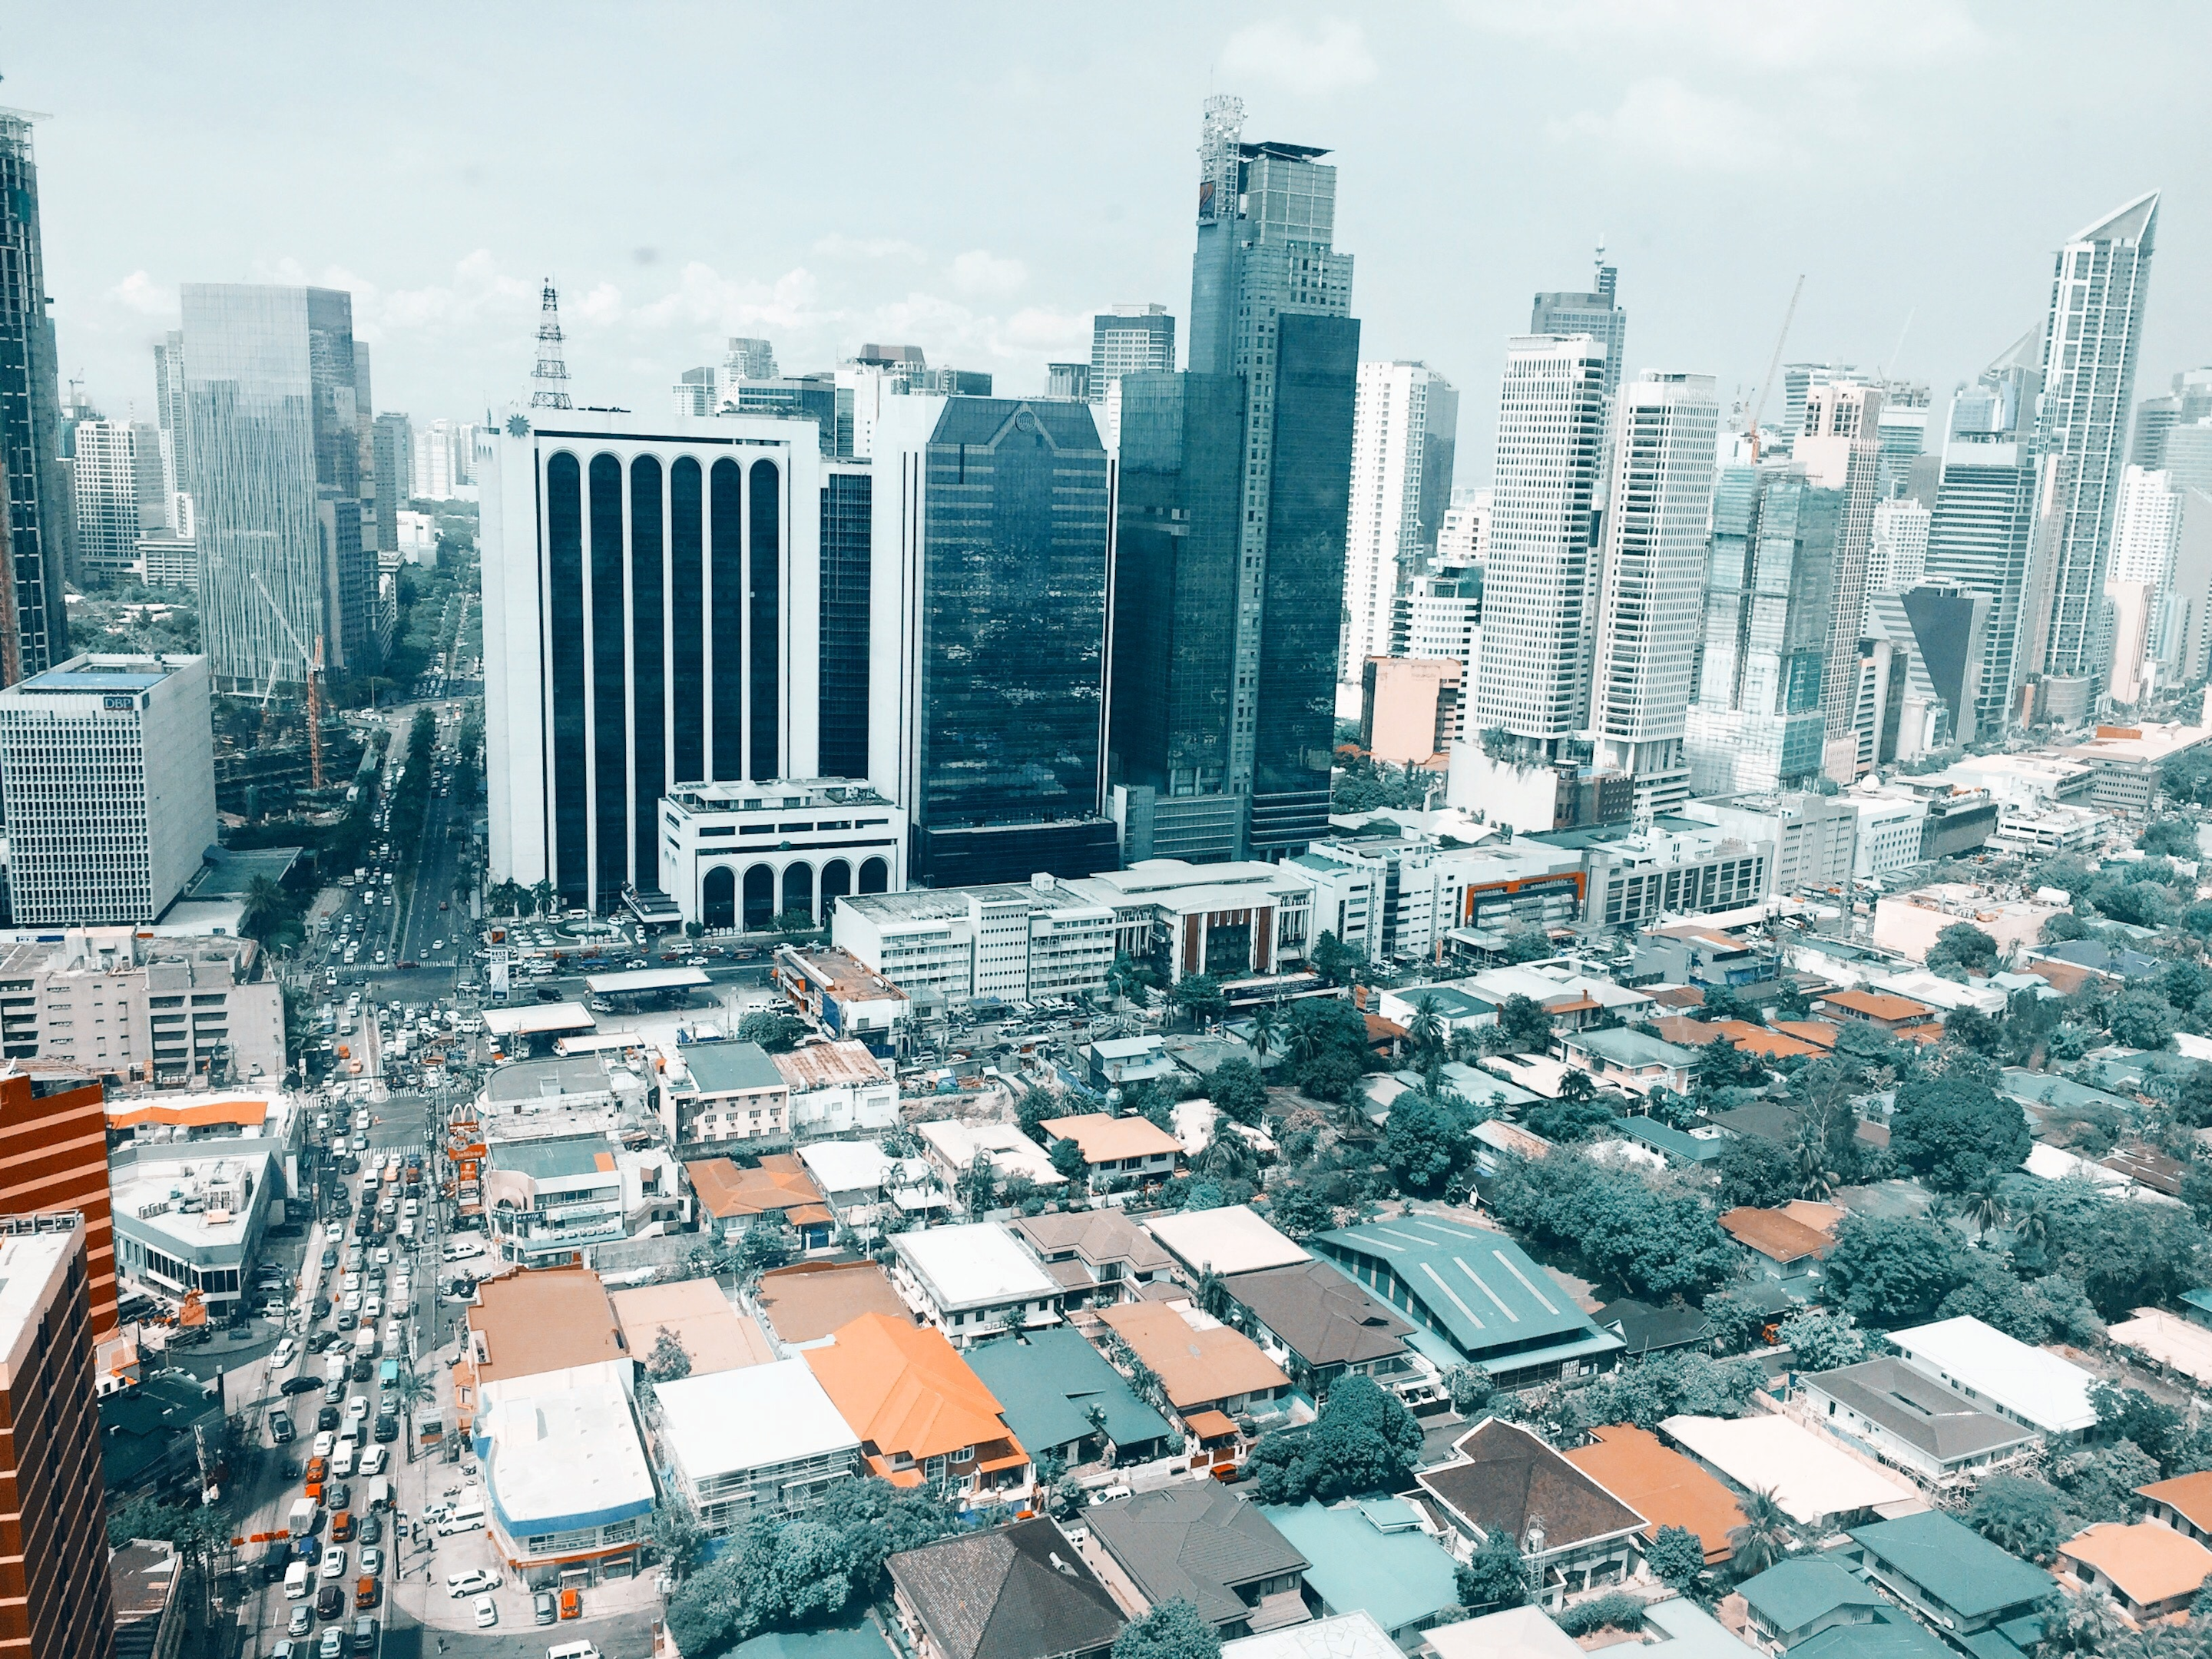 The Metro Manila cost of living is the third most expensive among SEA countries | Photo by Christian Paul Del Rosario from Pexels